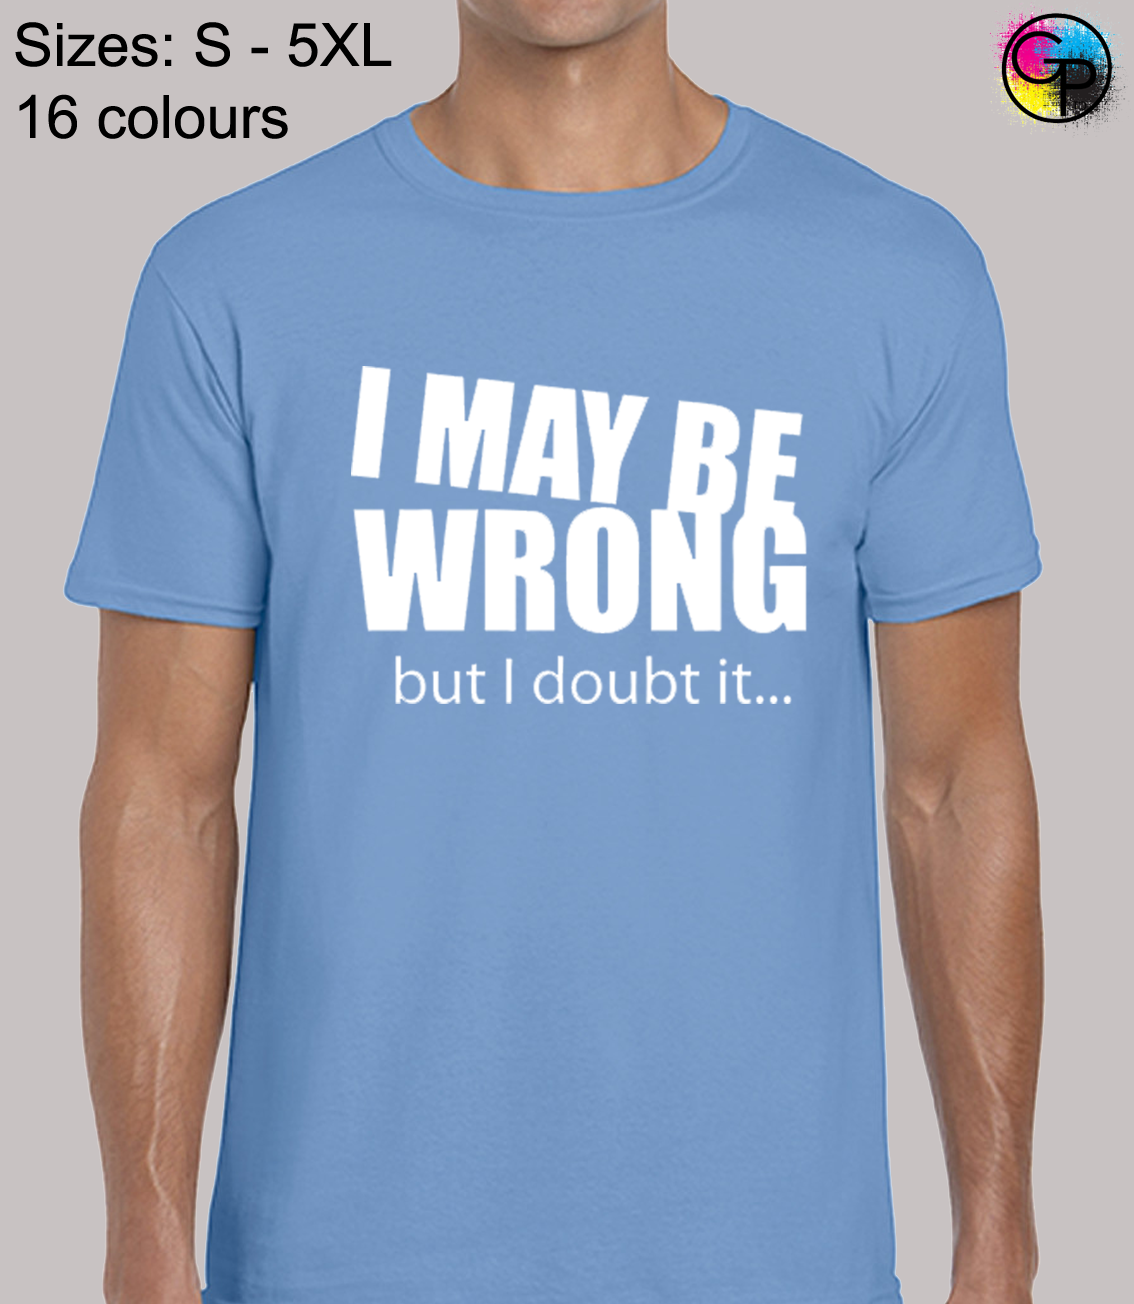 I May Be Wrong But I Doubt It Funny Regular Fit T-Shirt Top TShirt Tee for Men 